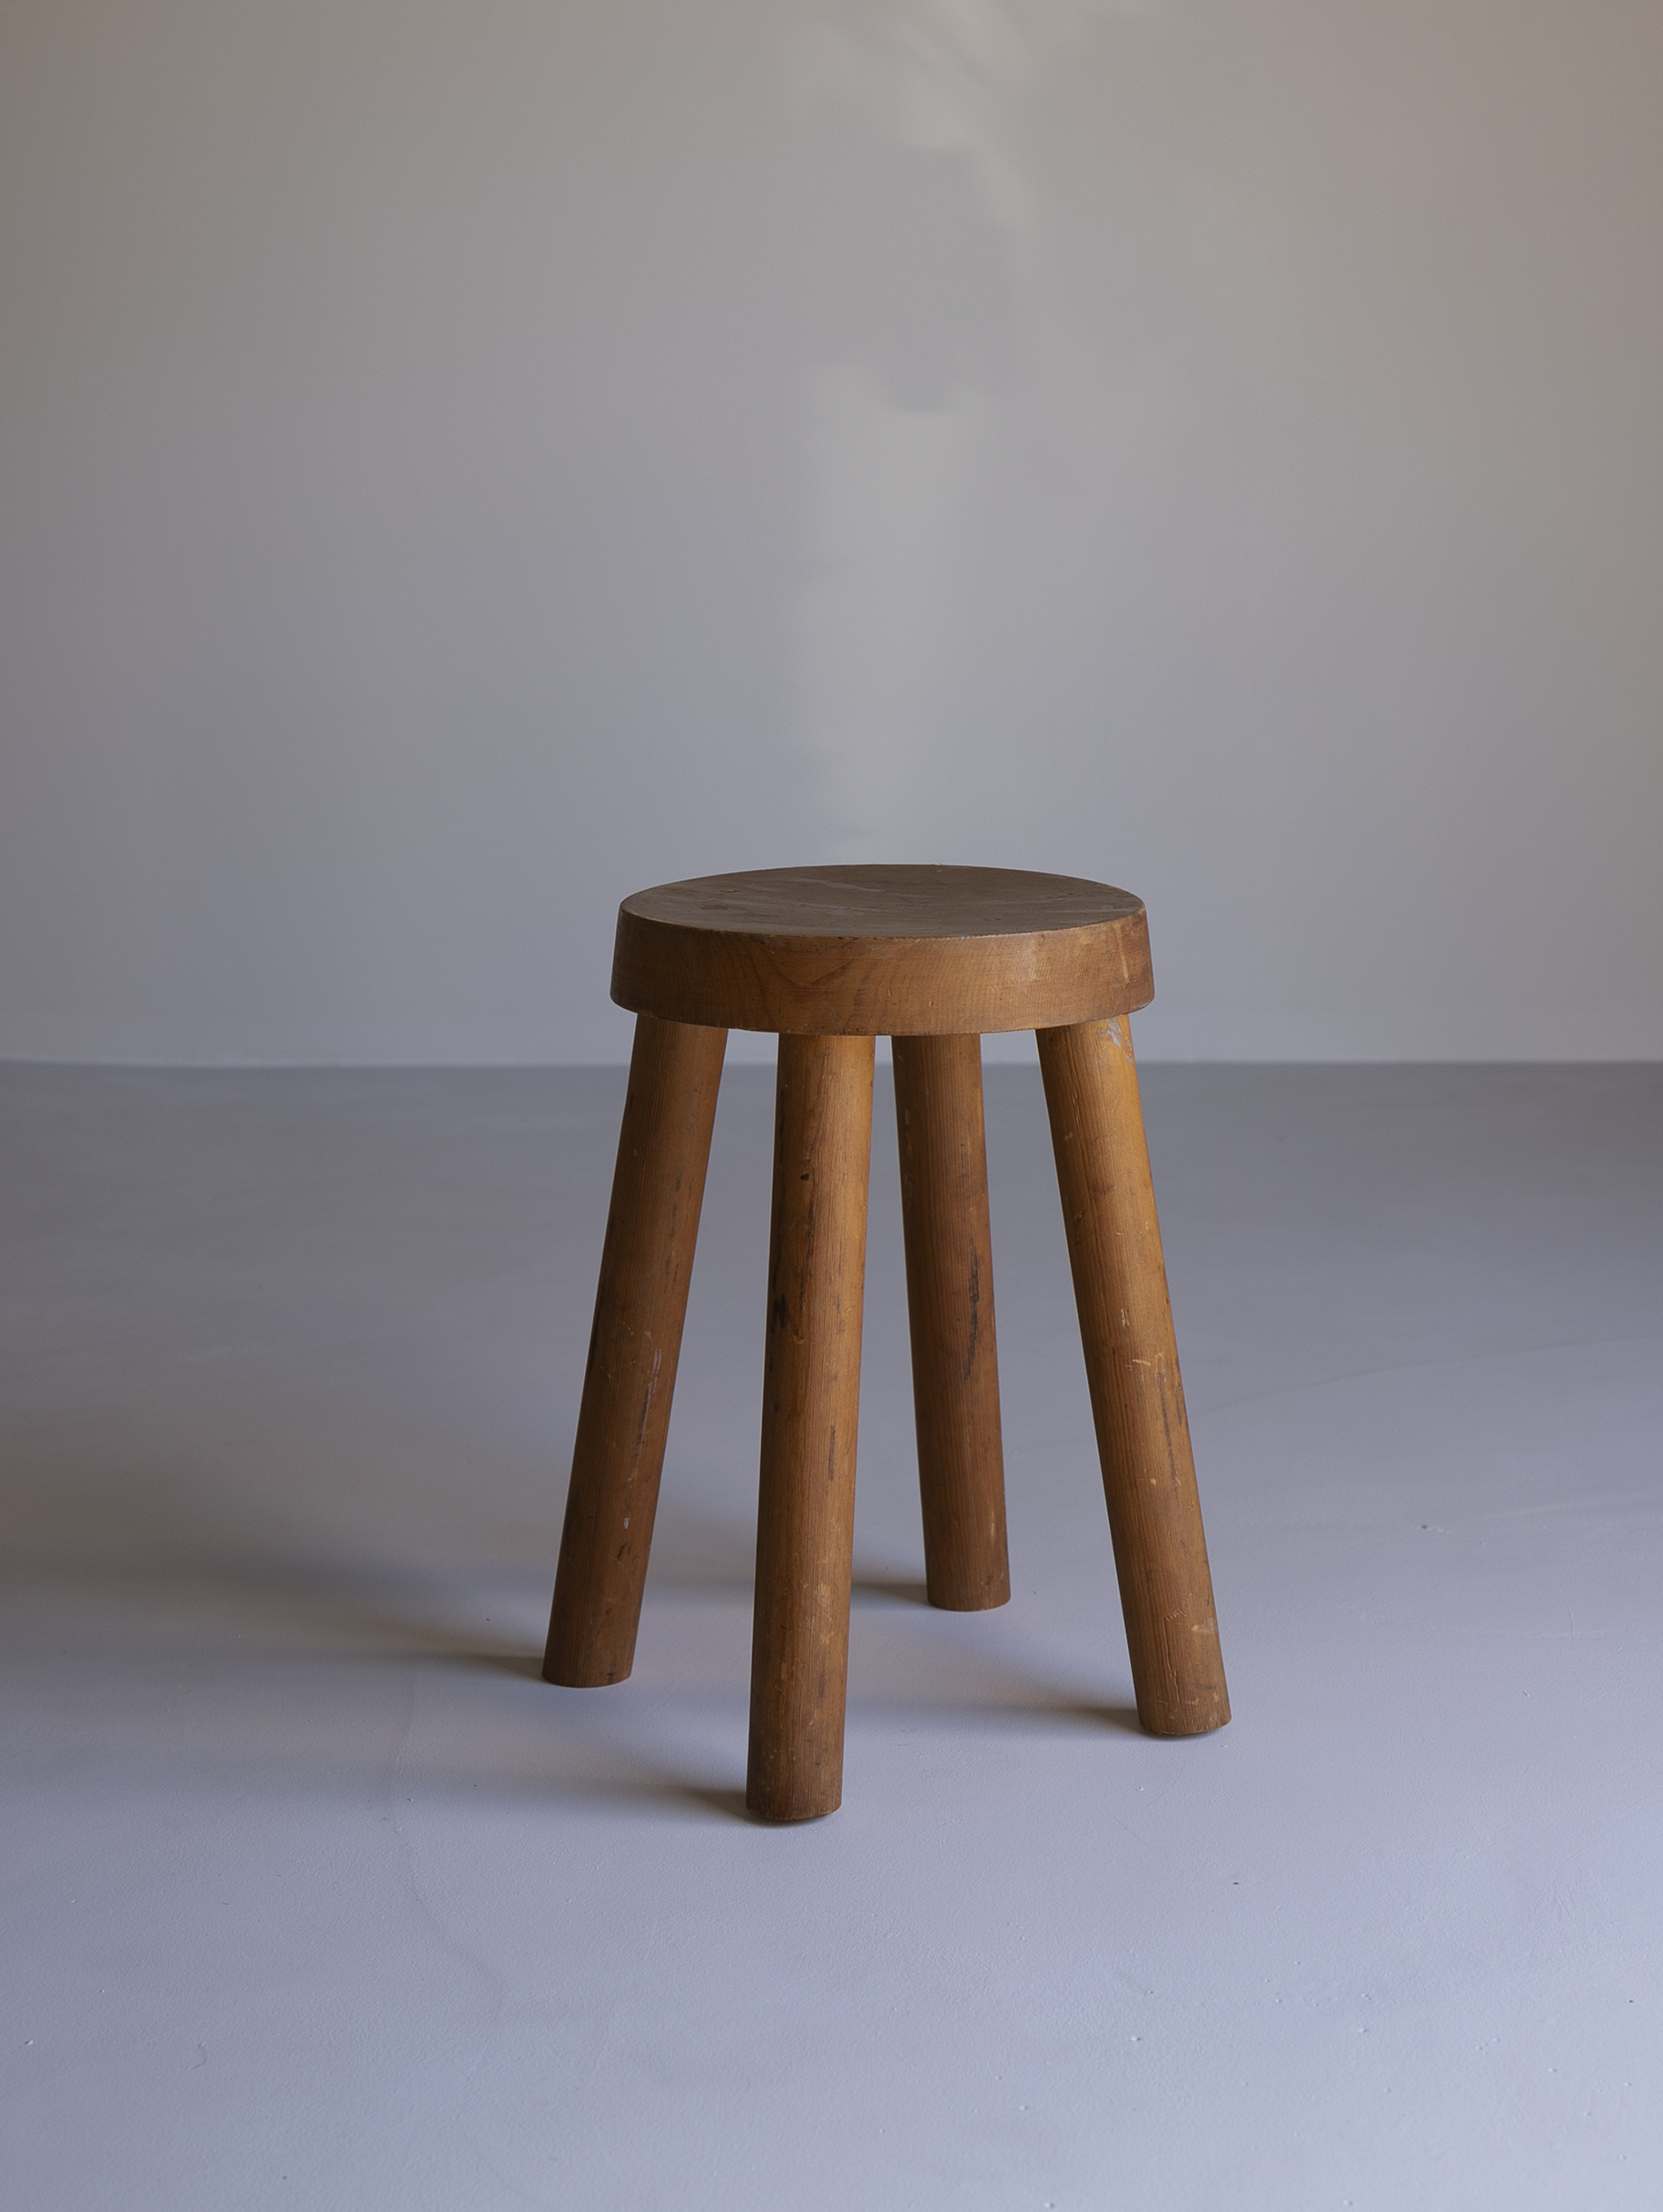 Wood stool for Méribel ski resort by Charlotte Perriand